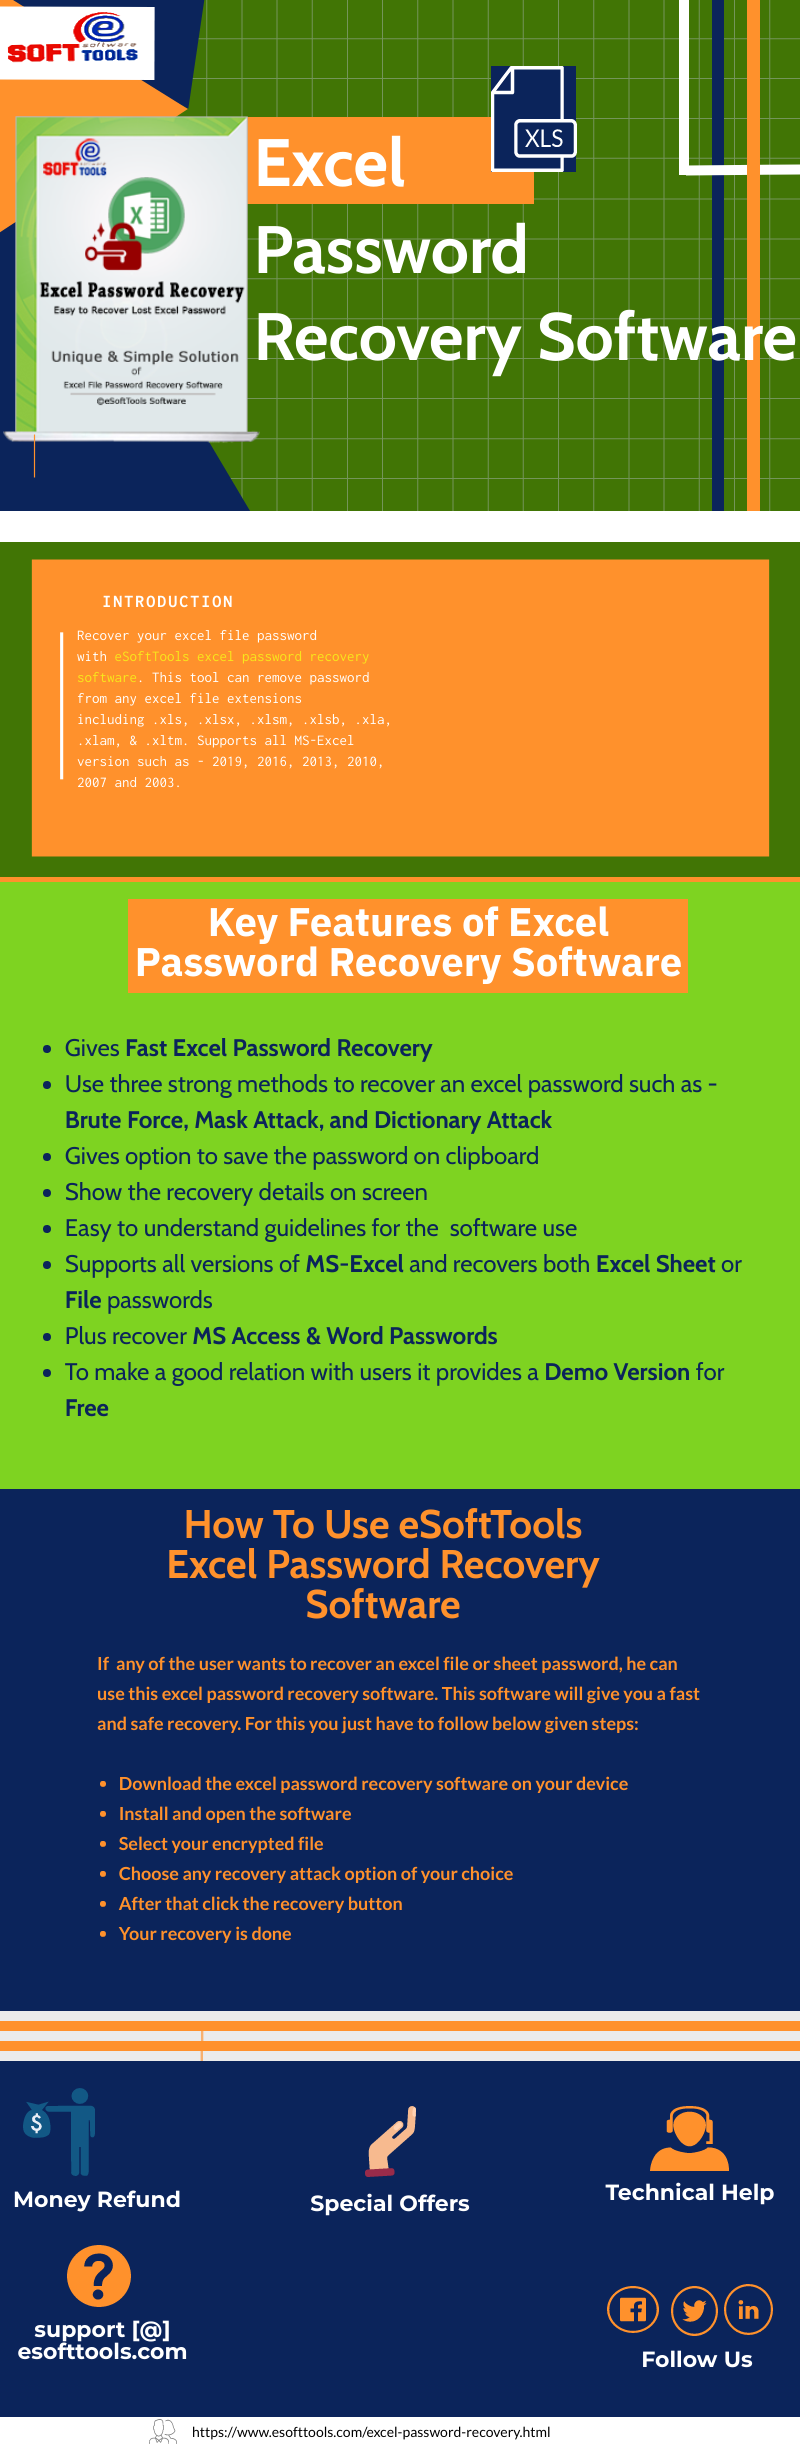 esofttools-excelpassword-recovery.png